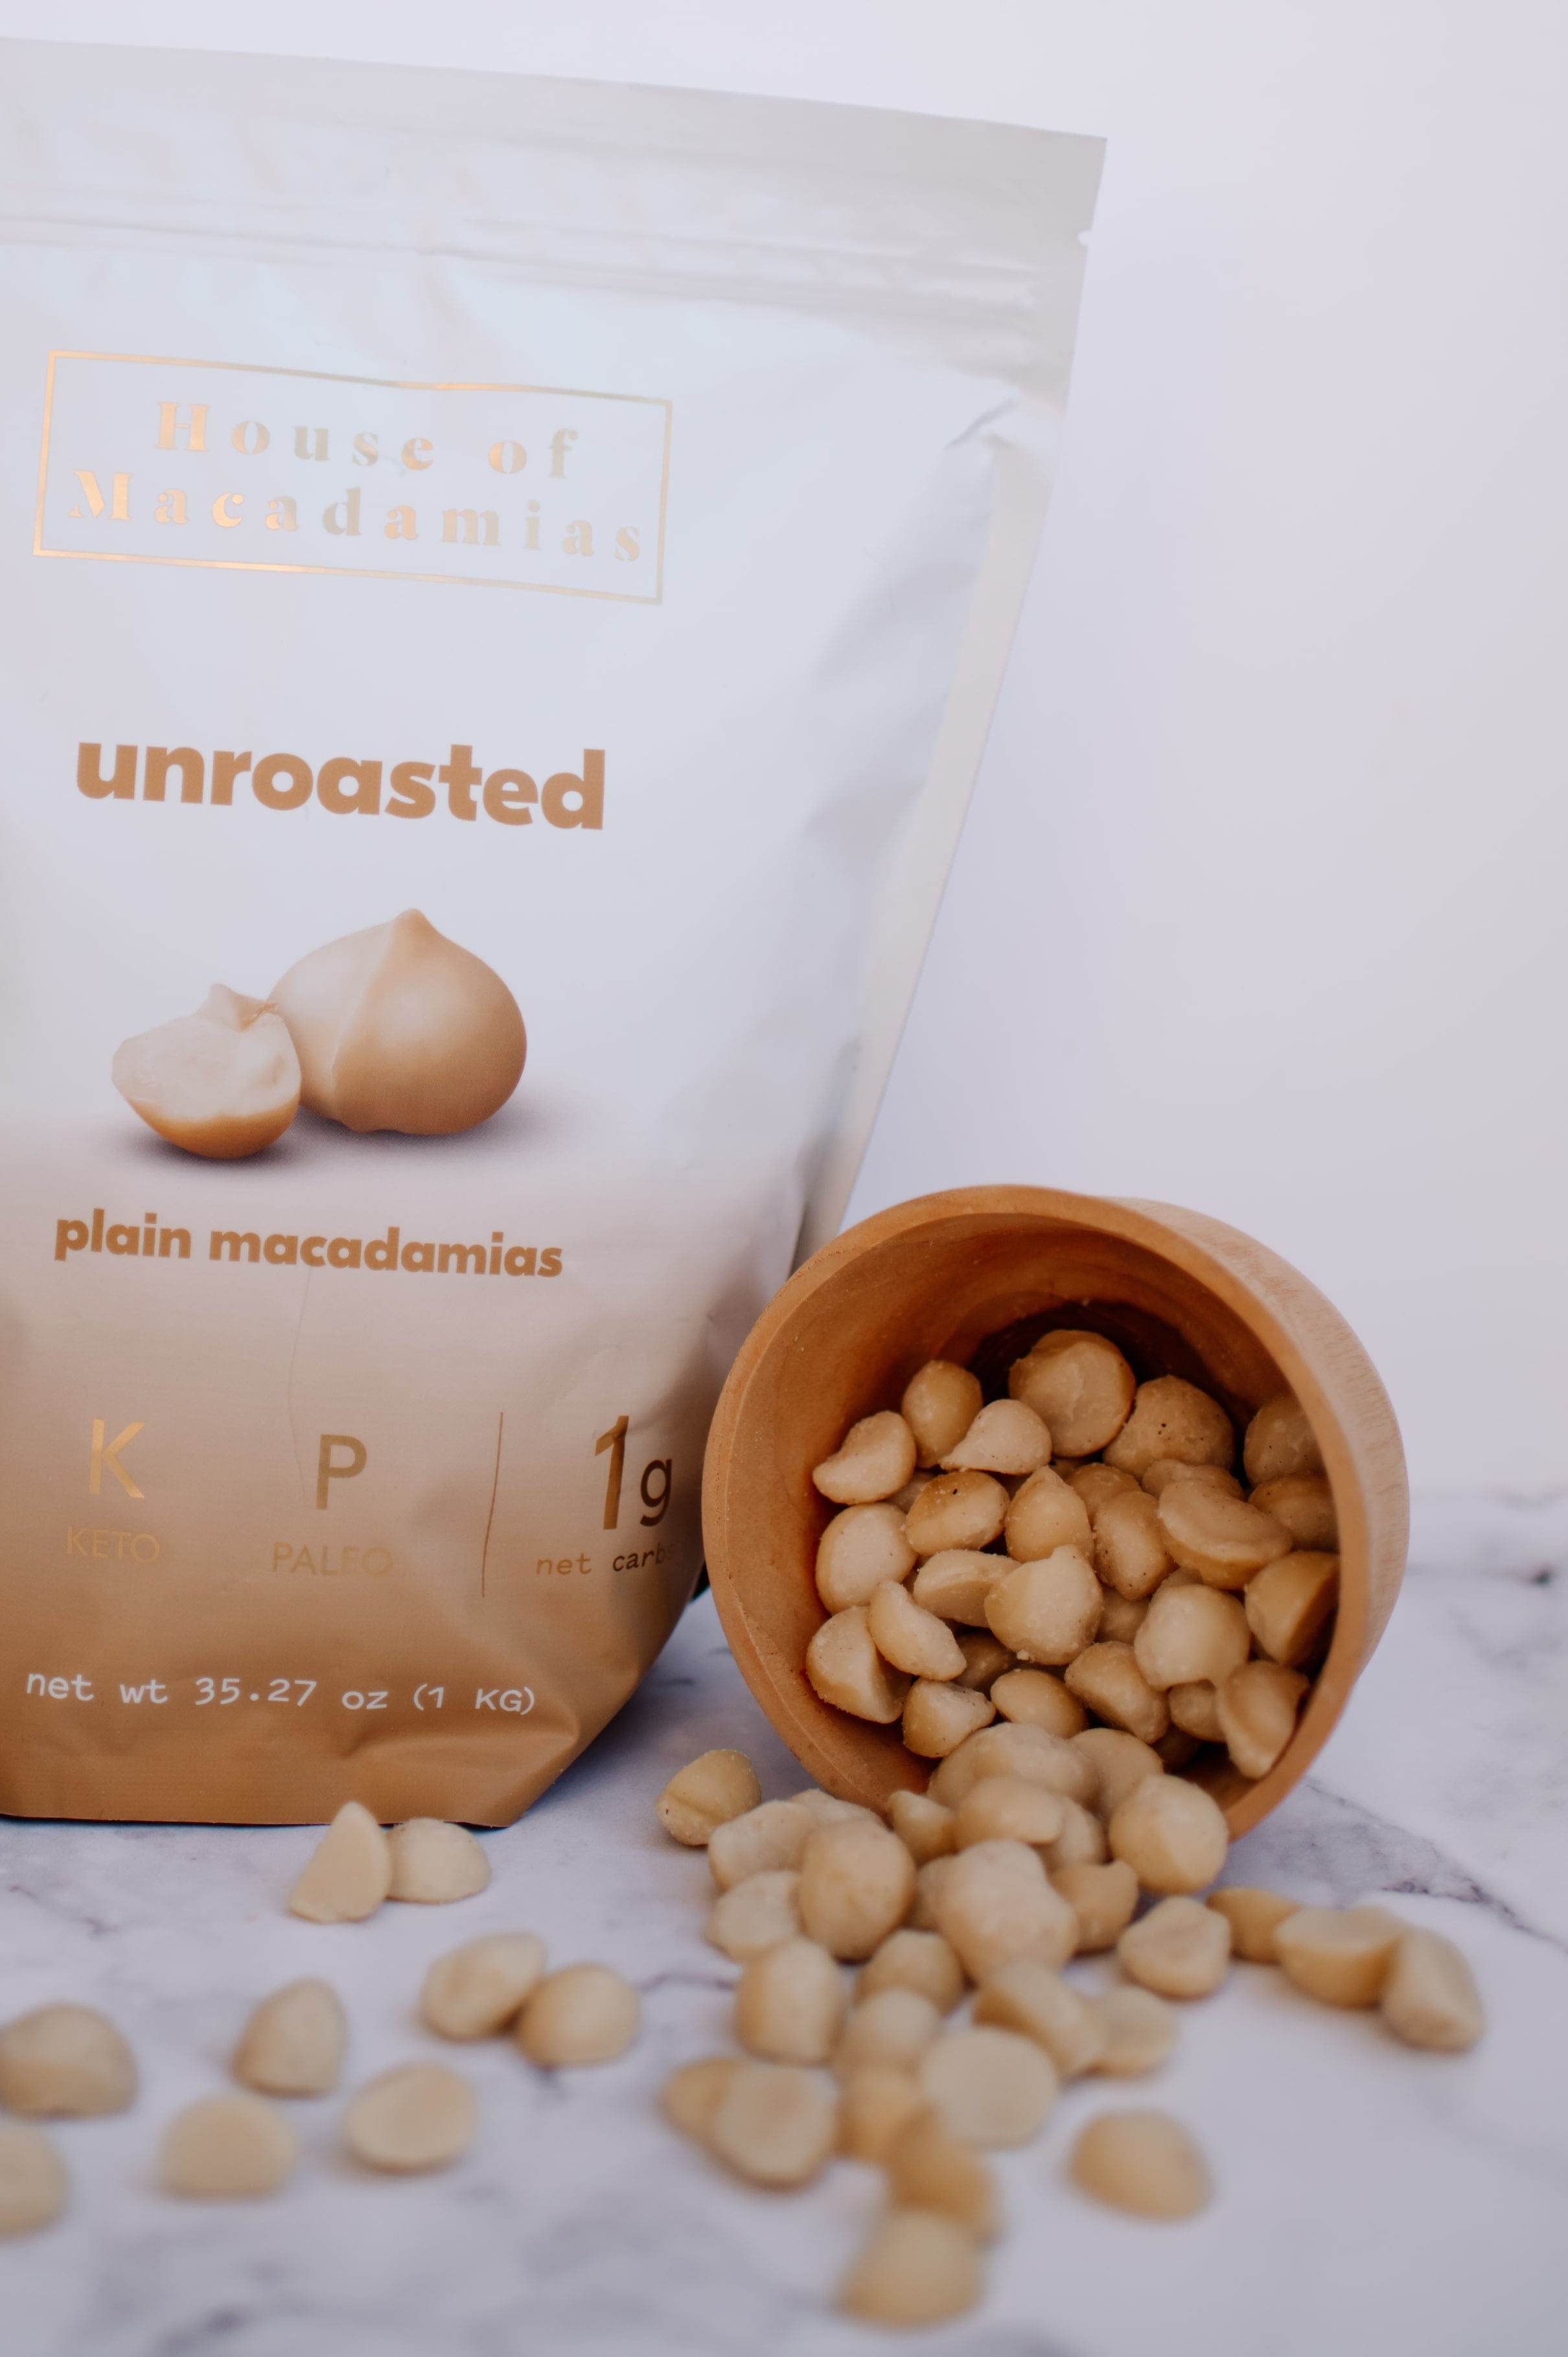 Unroasted Macadamia Nuts (1 kg/2.2 lbs) - House of Macadamias -snack ideas for work